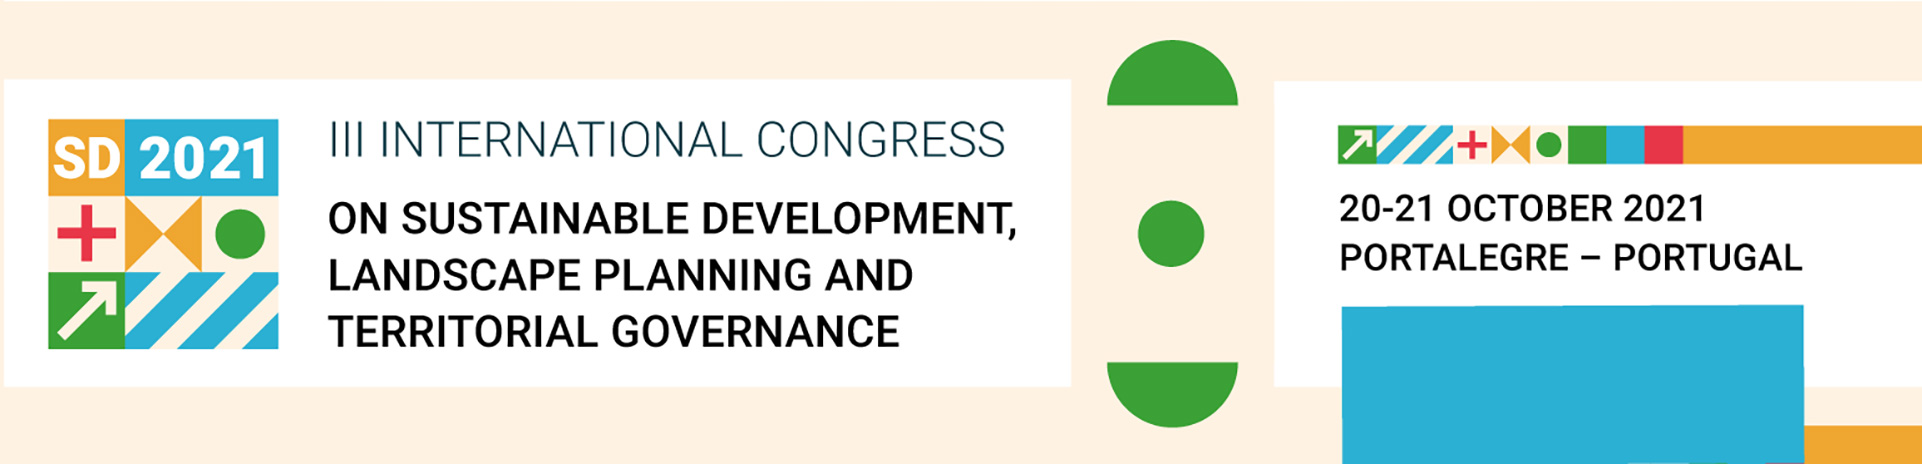 III International Congress on Sustainable Development, Landscape Planning and Territorial Governance